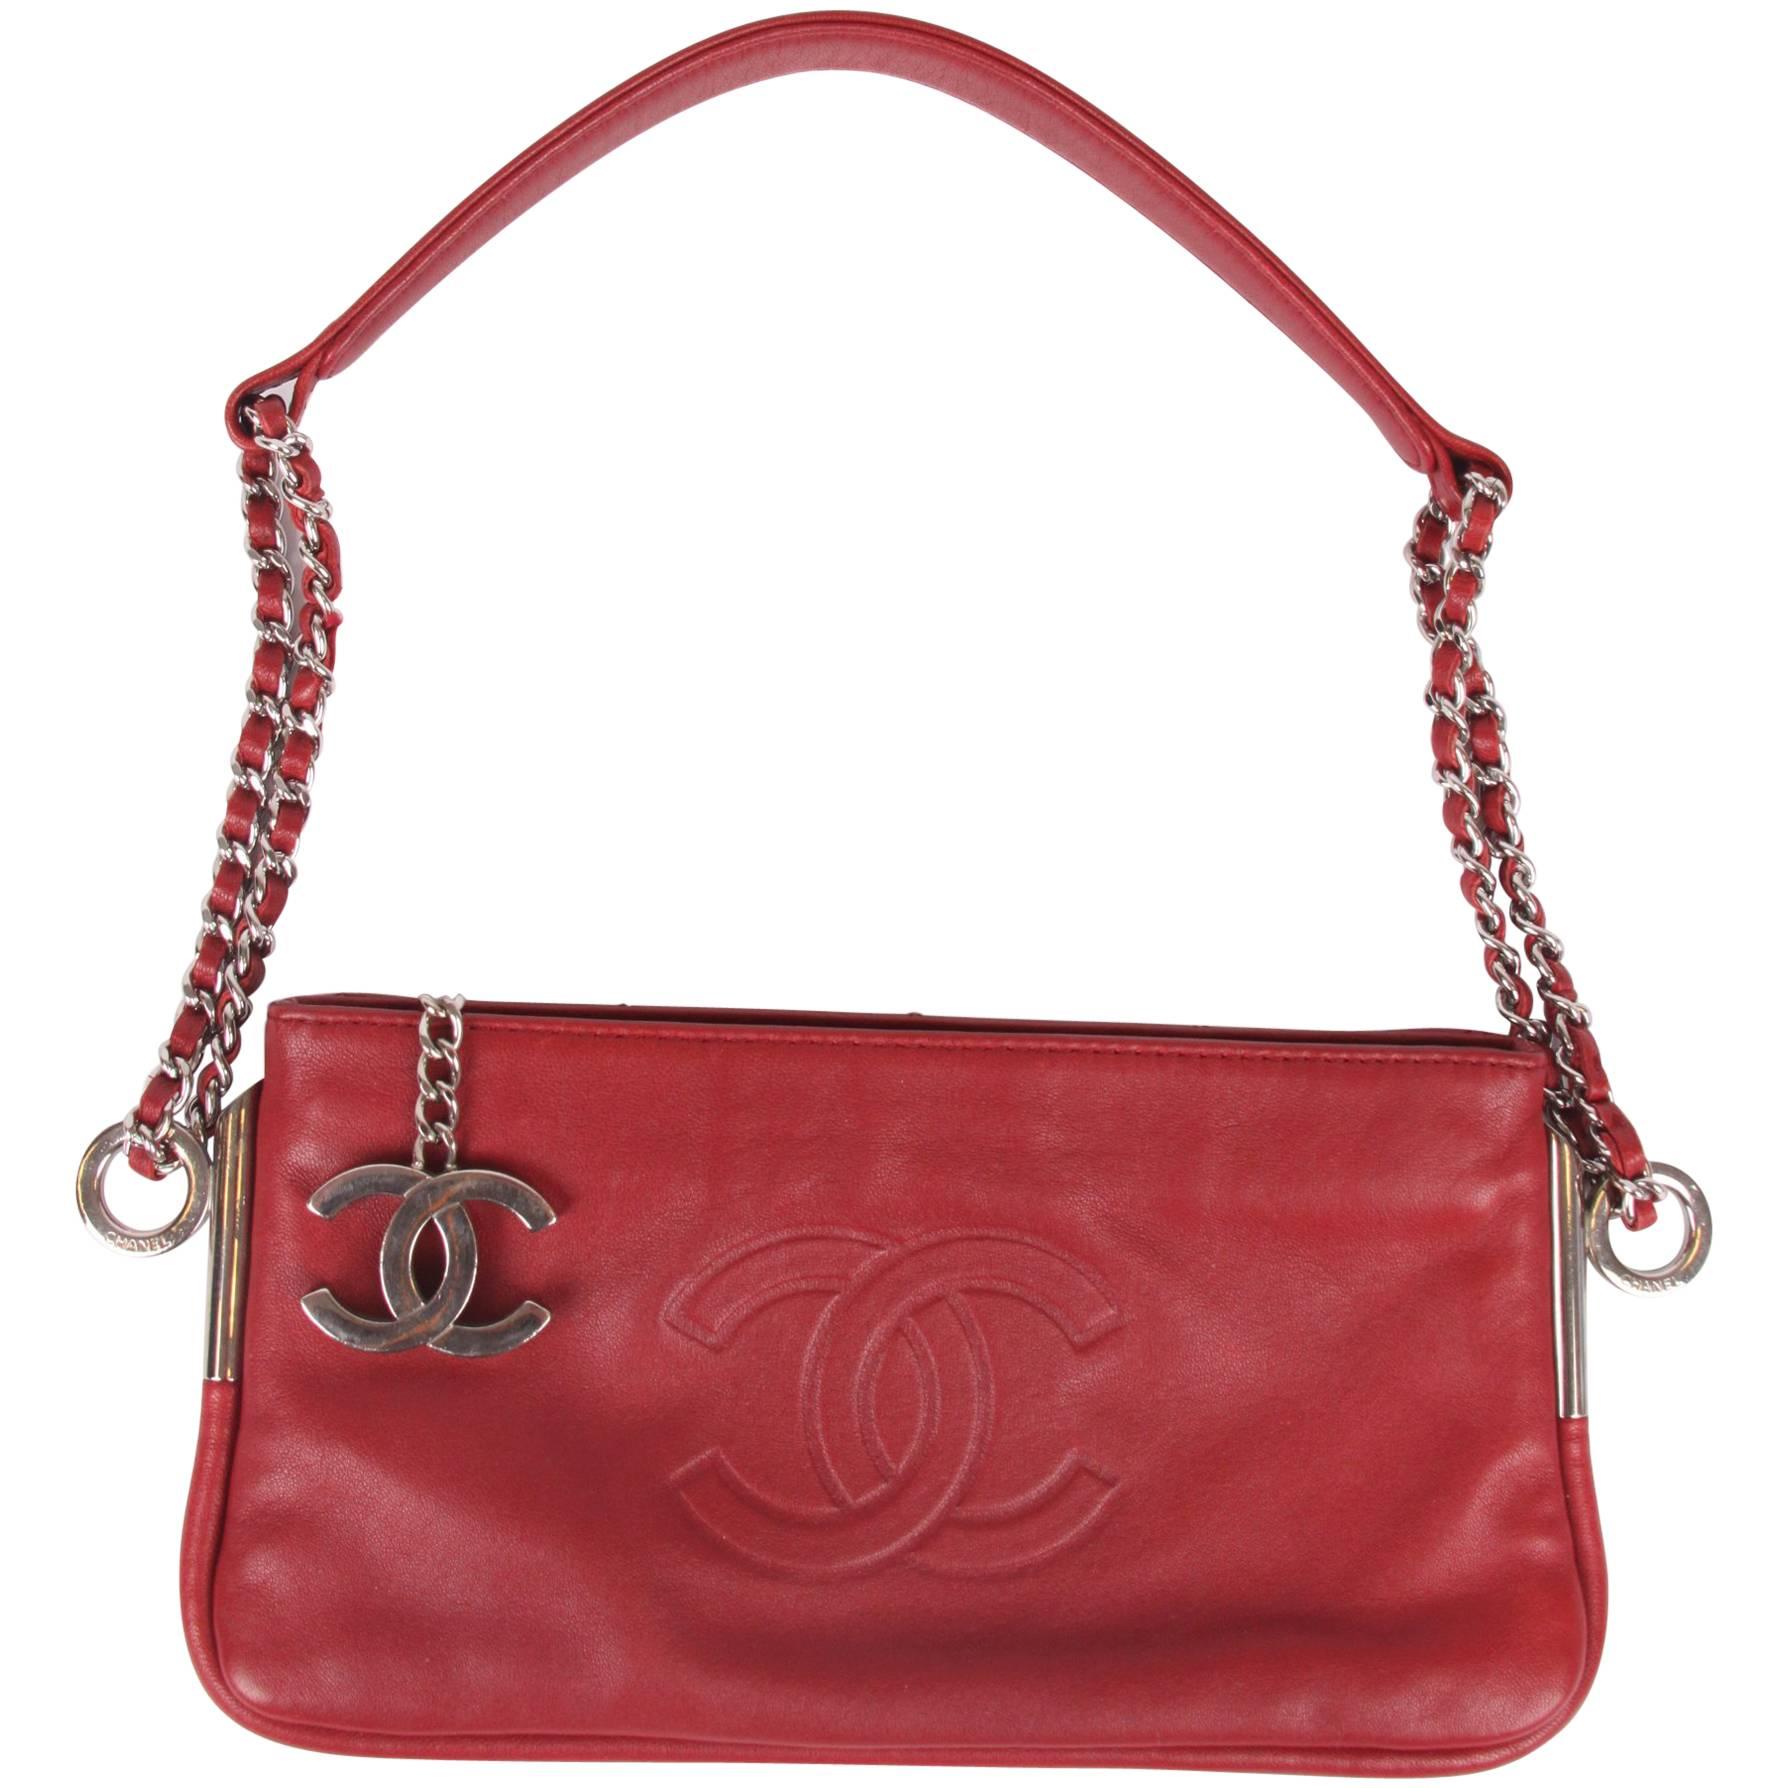 Chanel Clutch - dark red leather For Sale